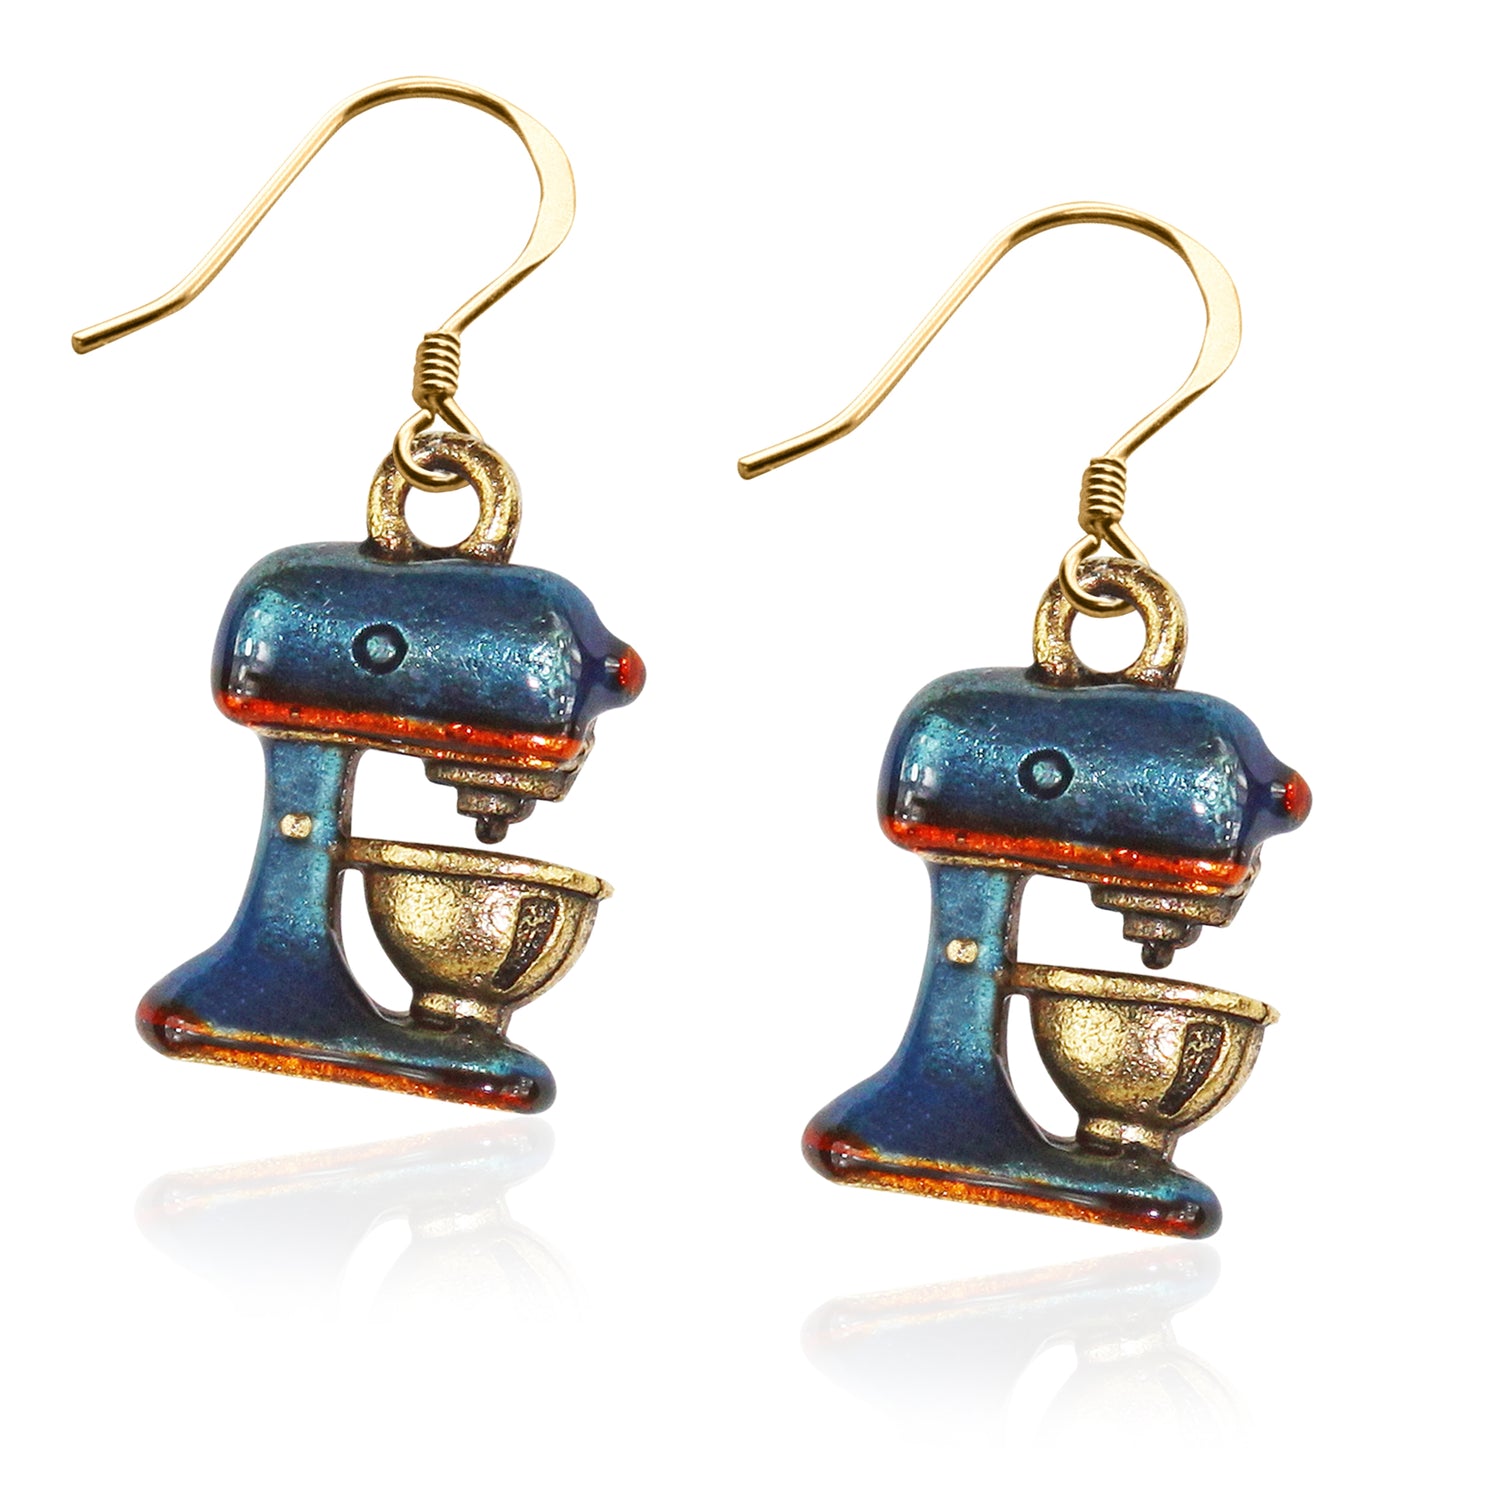 Whimsical Gifts | Mixer Charm Earrings in Gold Finish | Hobbies & Special Interests | Chef | Cooking | Baking | Jewelry